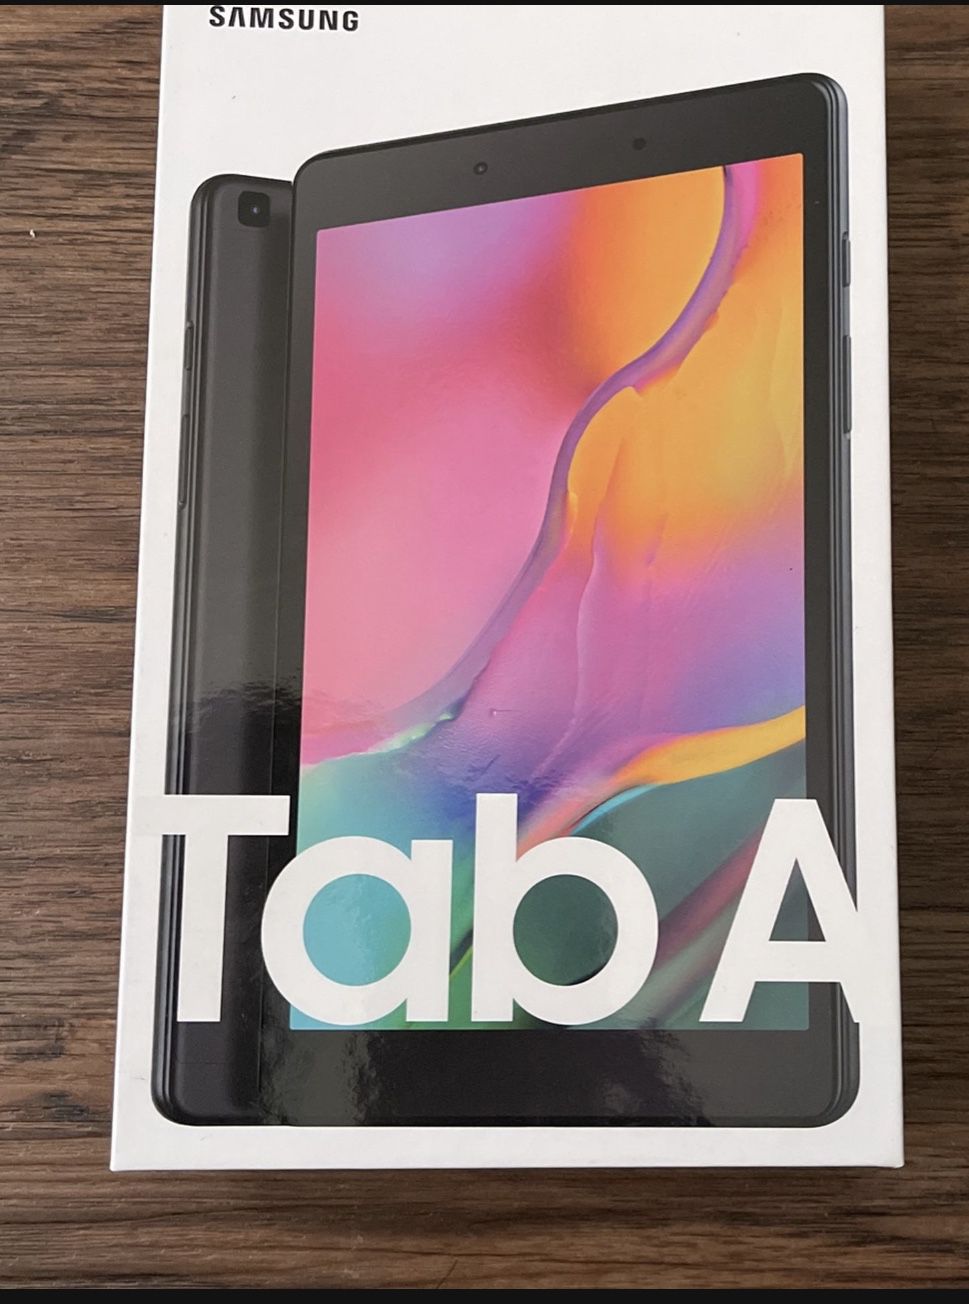 Samsung Galaxy Tab A (2020) 32GB , Open Box Gently Used ( 8.0”) Hard Full Body Case for Added Protection 